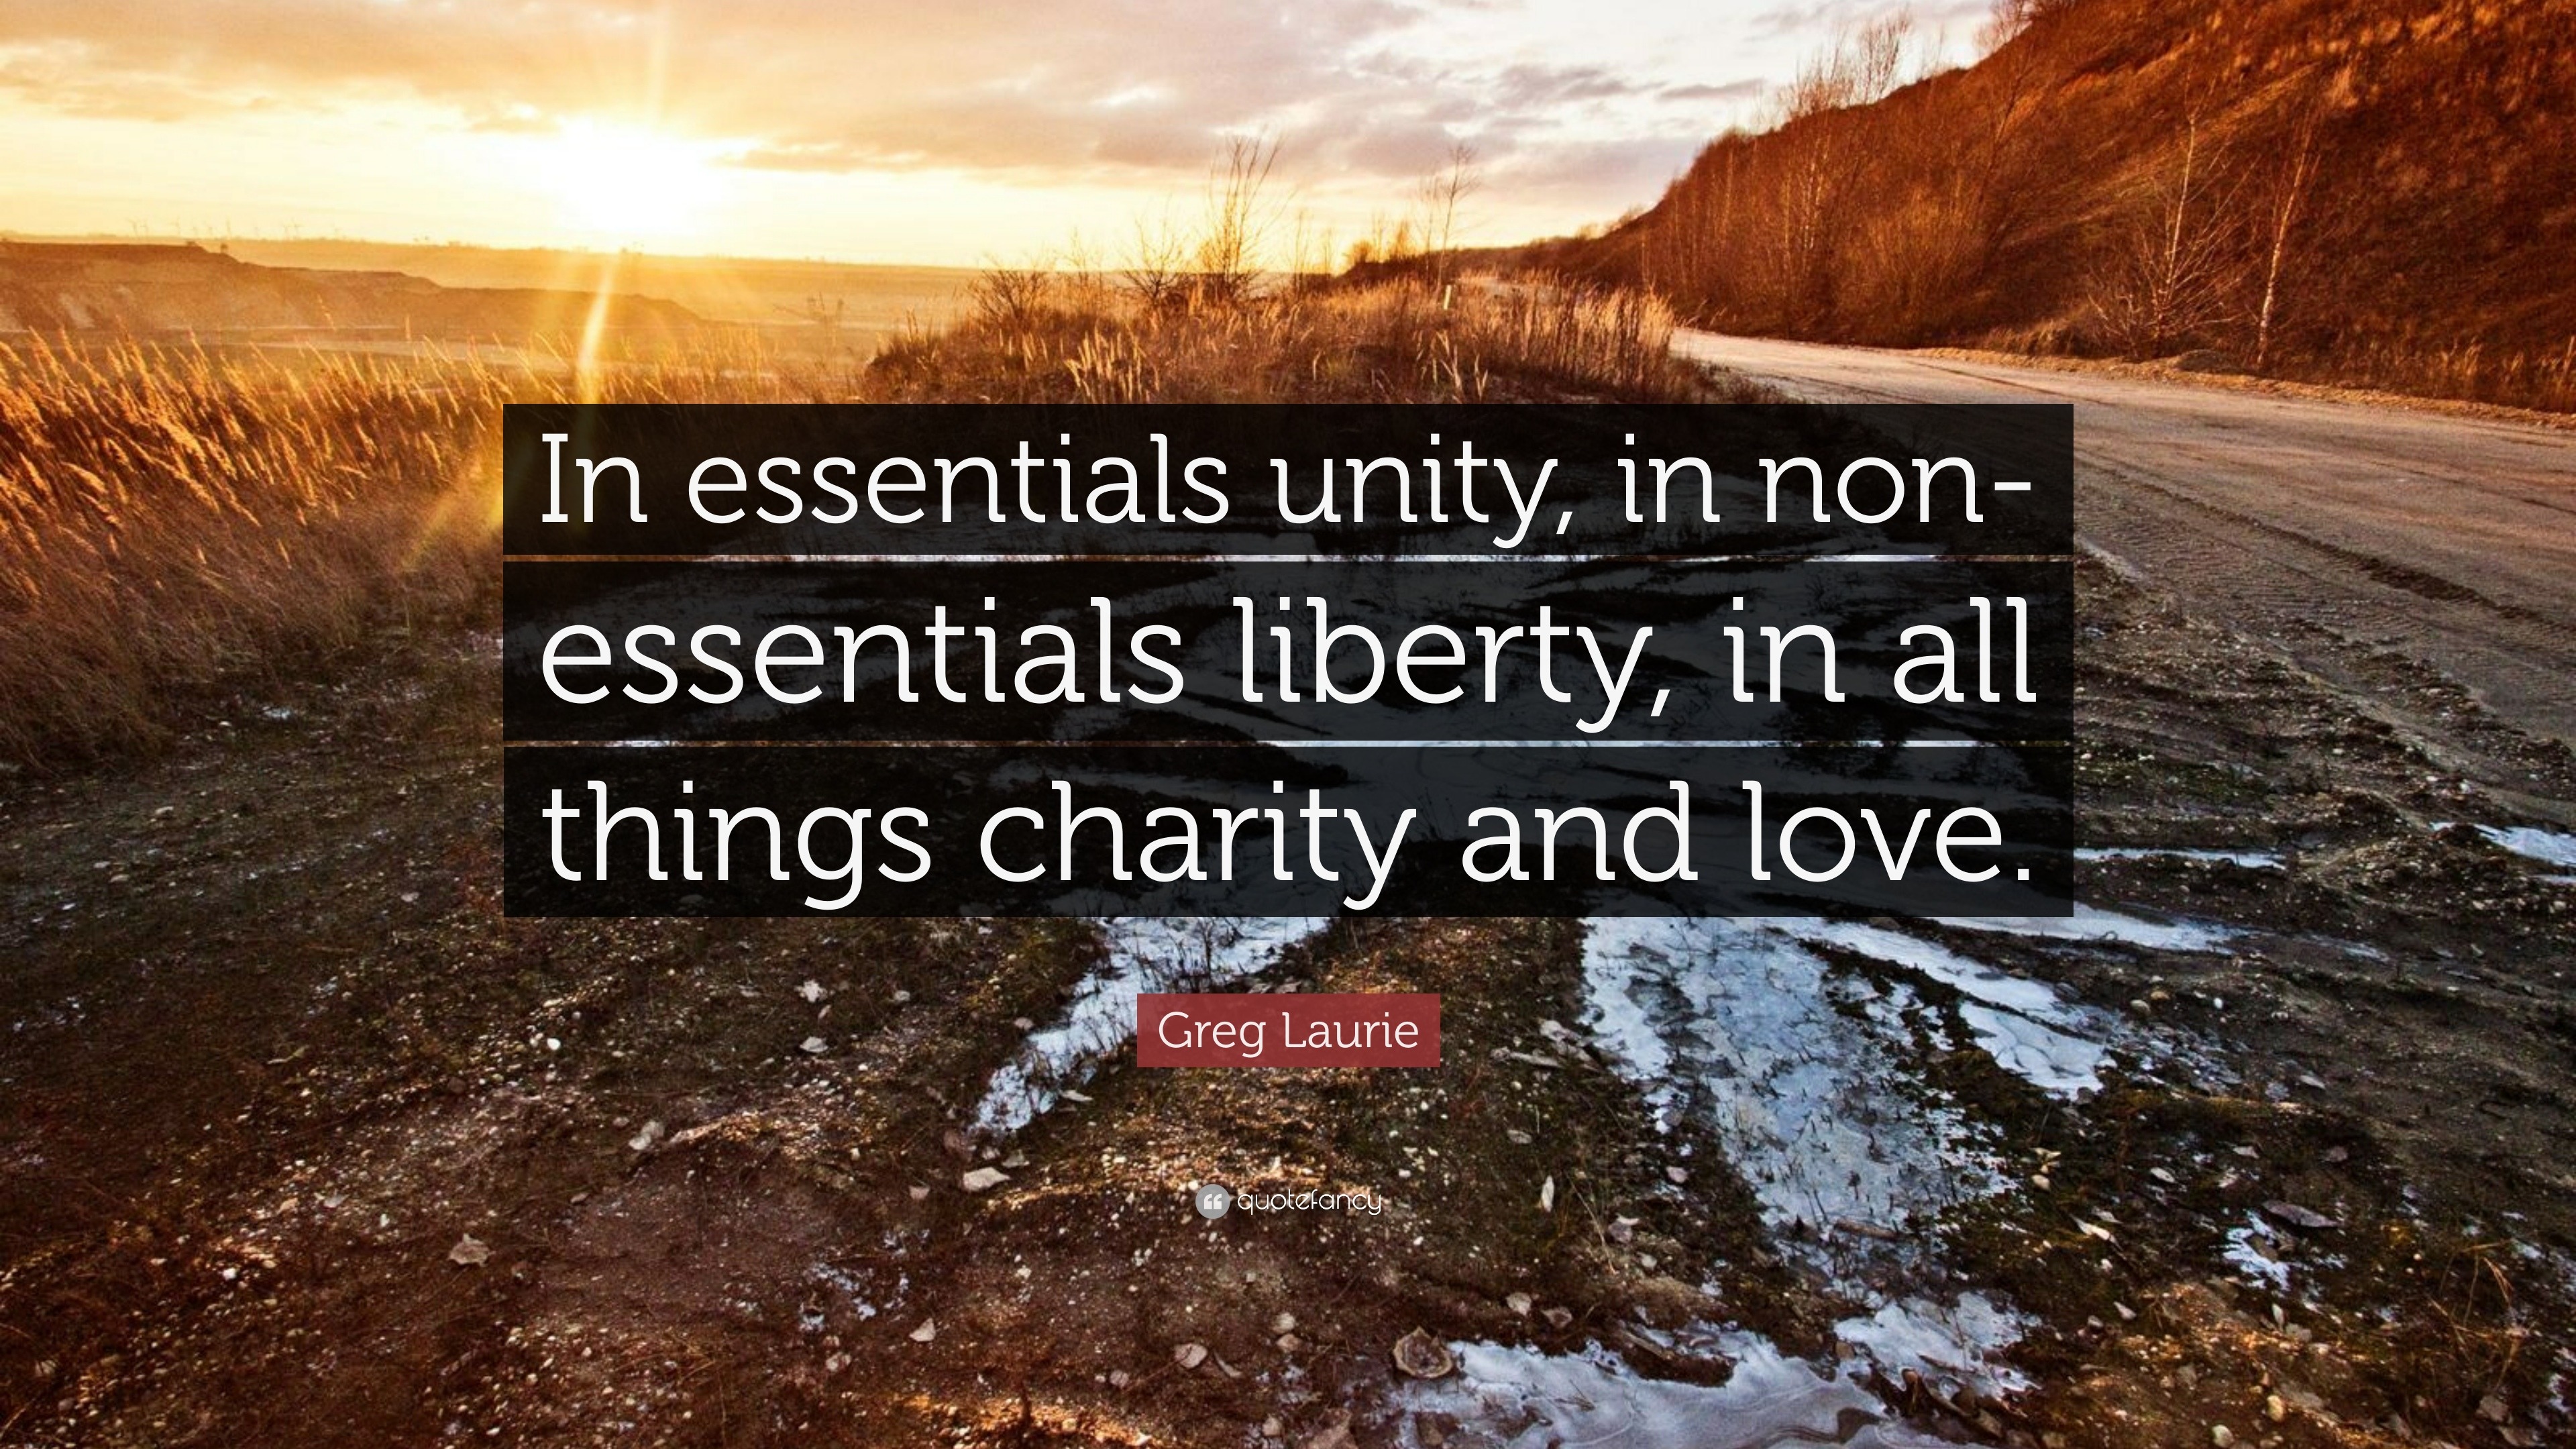 Greg Laurie Quote: “In essentials unity, in non-essentials liberty, in